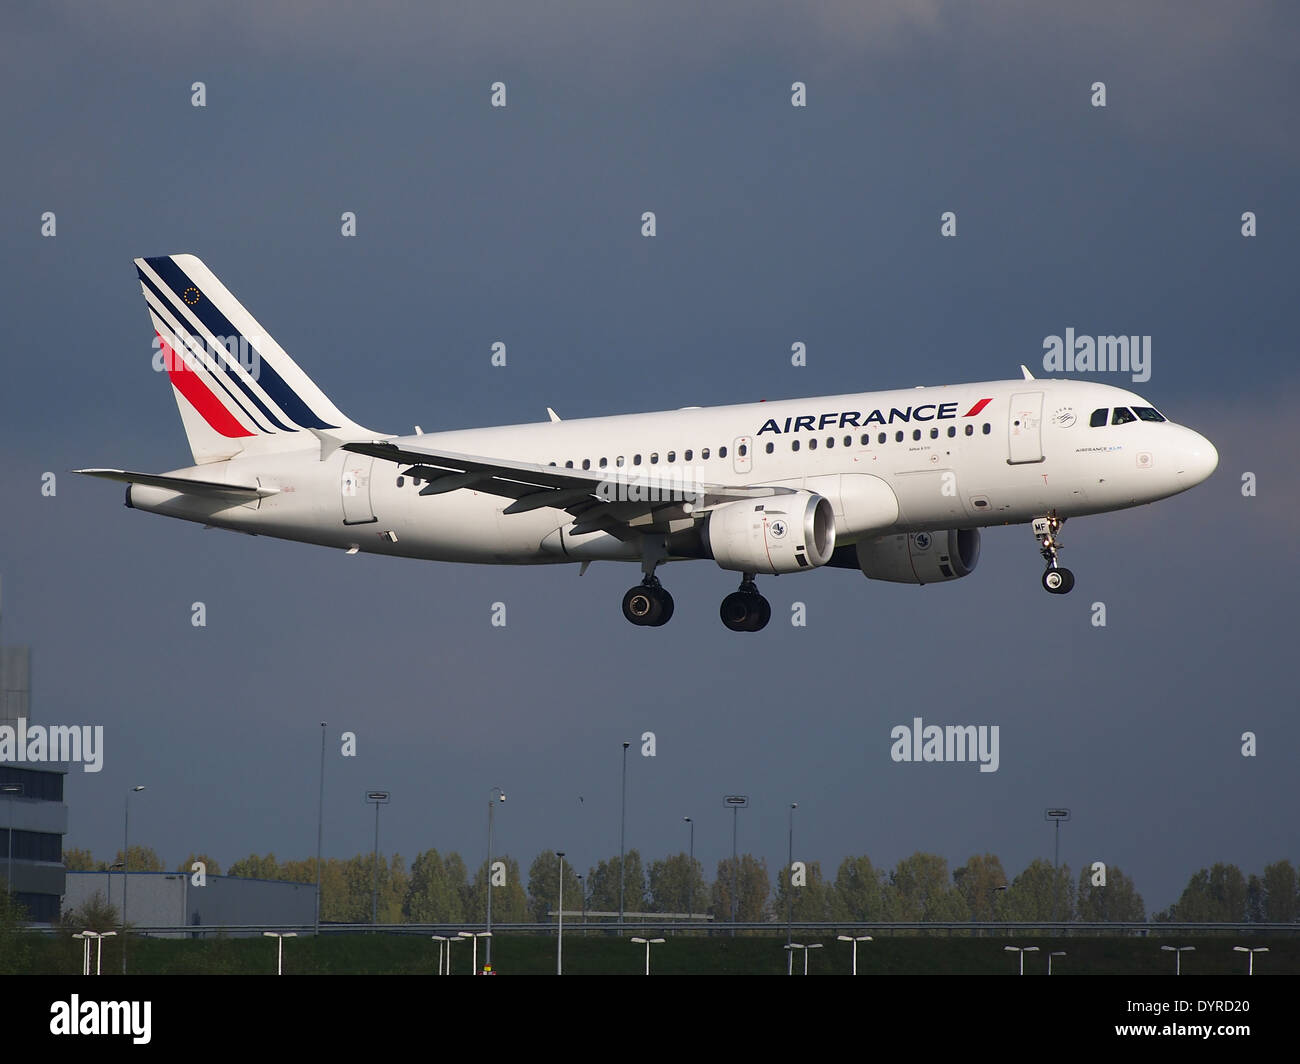 F-GPMF Air France Airbus A319-113 landing at Schiphol (AMS - EHAM), The Netherlands Stock Photo